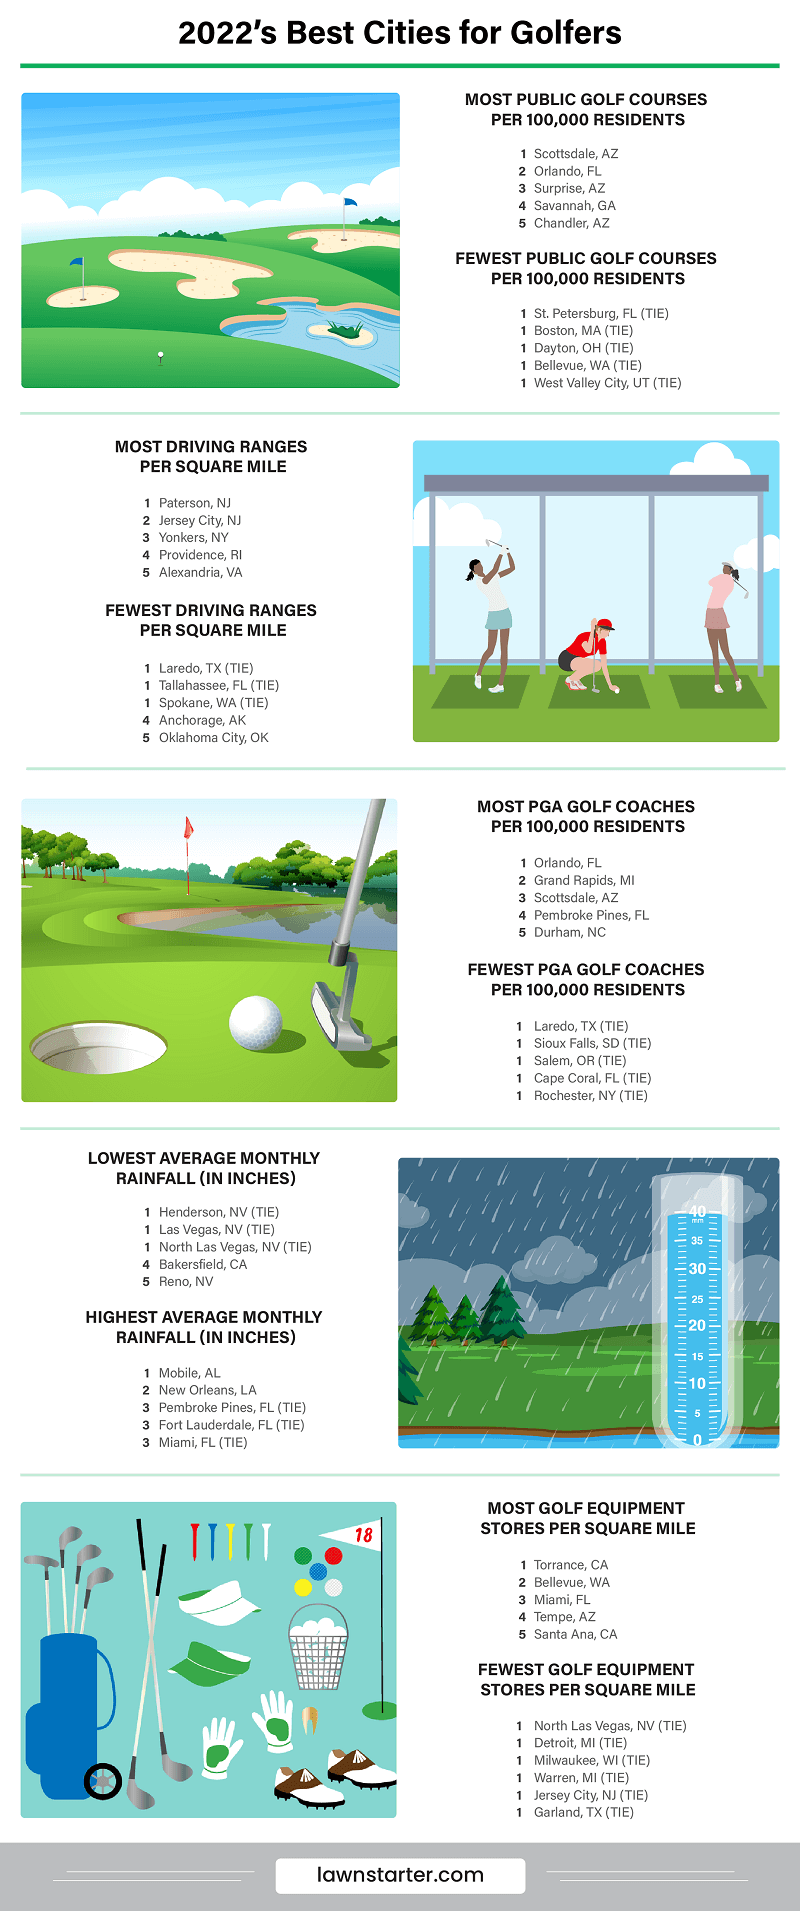 Infographic showing the Best Cities for Golfers, a ranking based on 22 key factors, such as weather, number of golf courses, and access to equipment